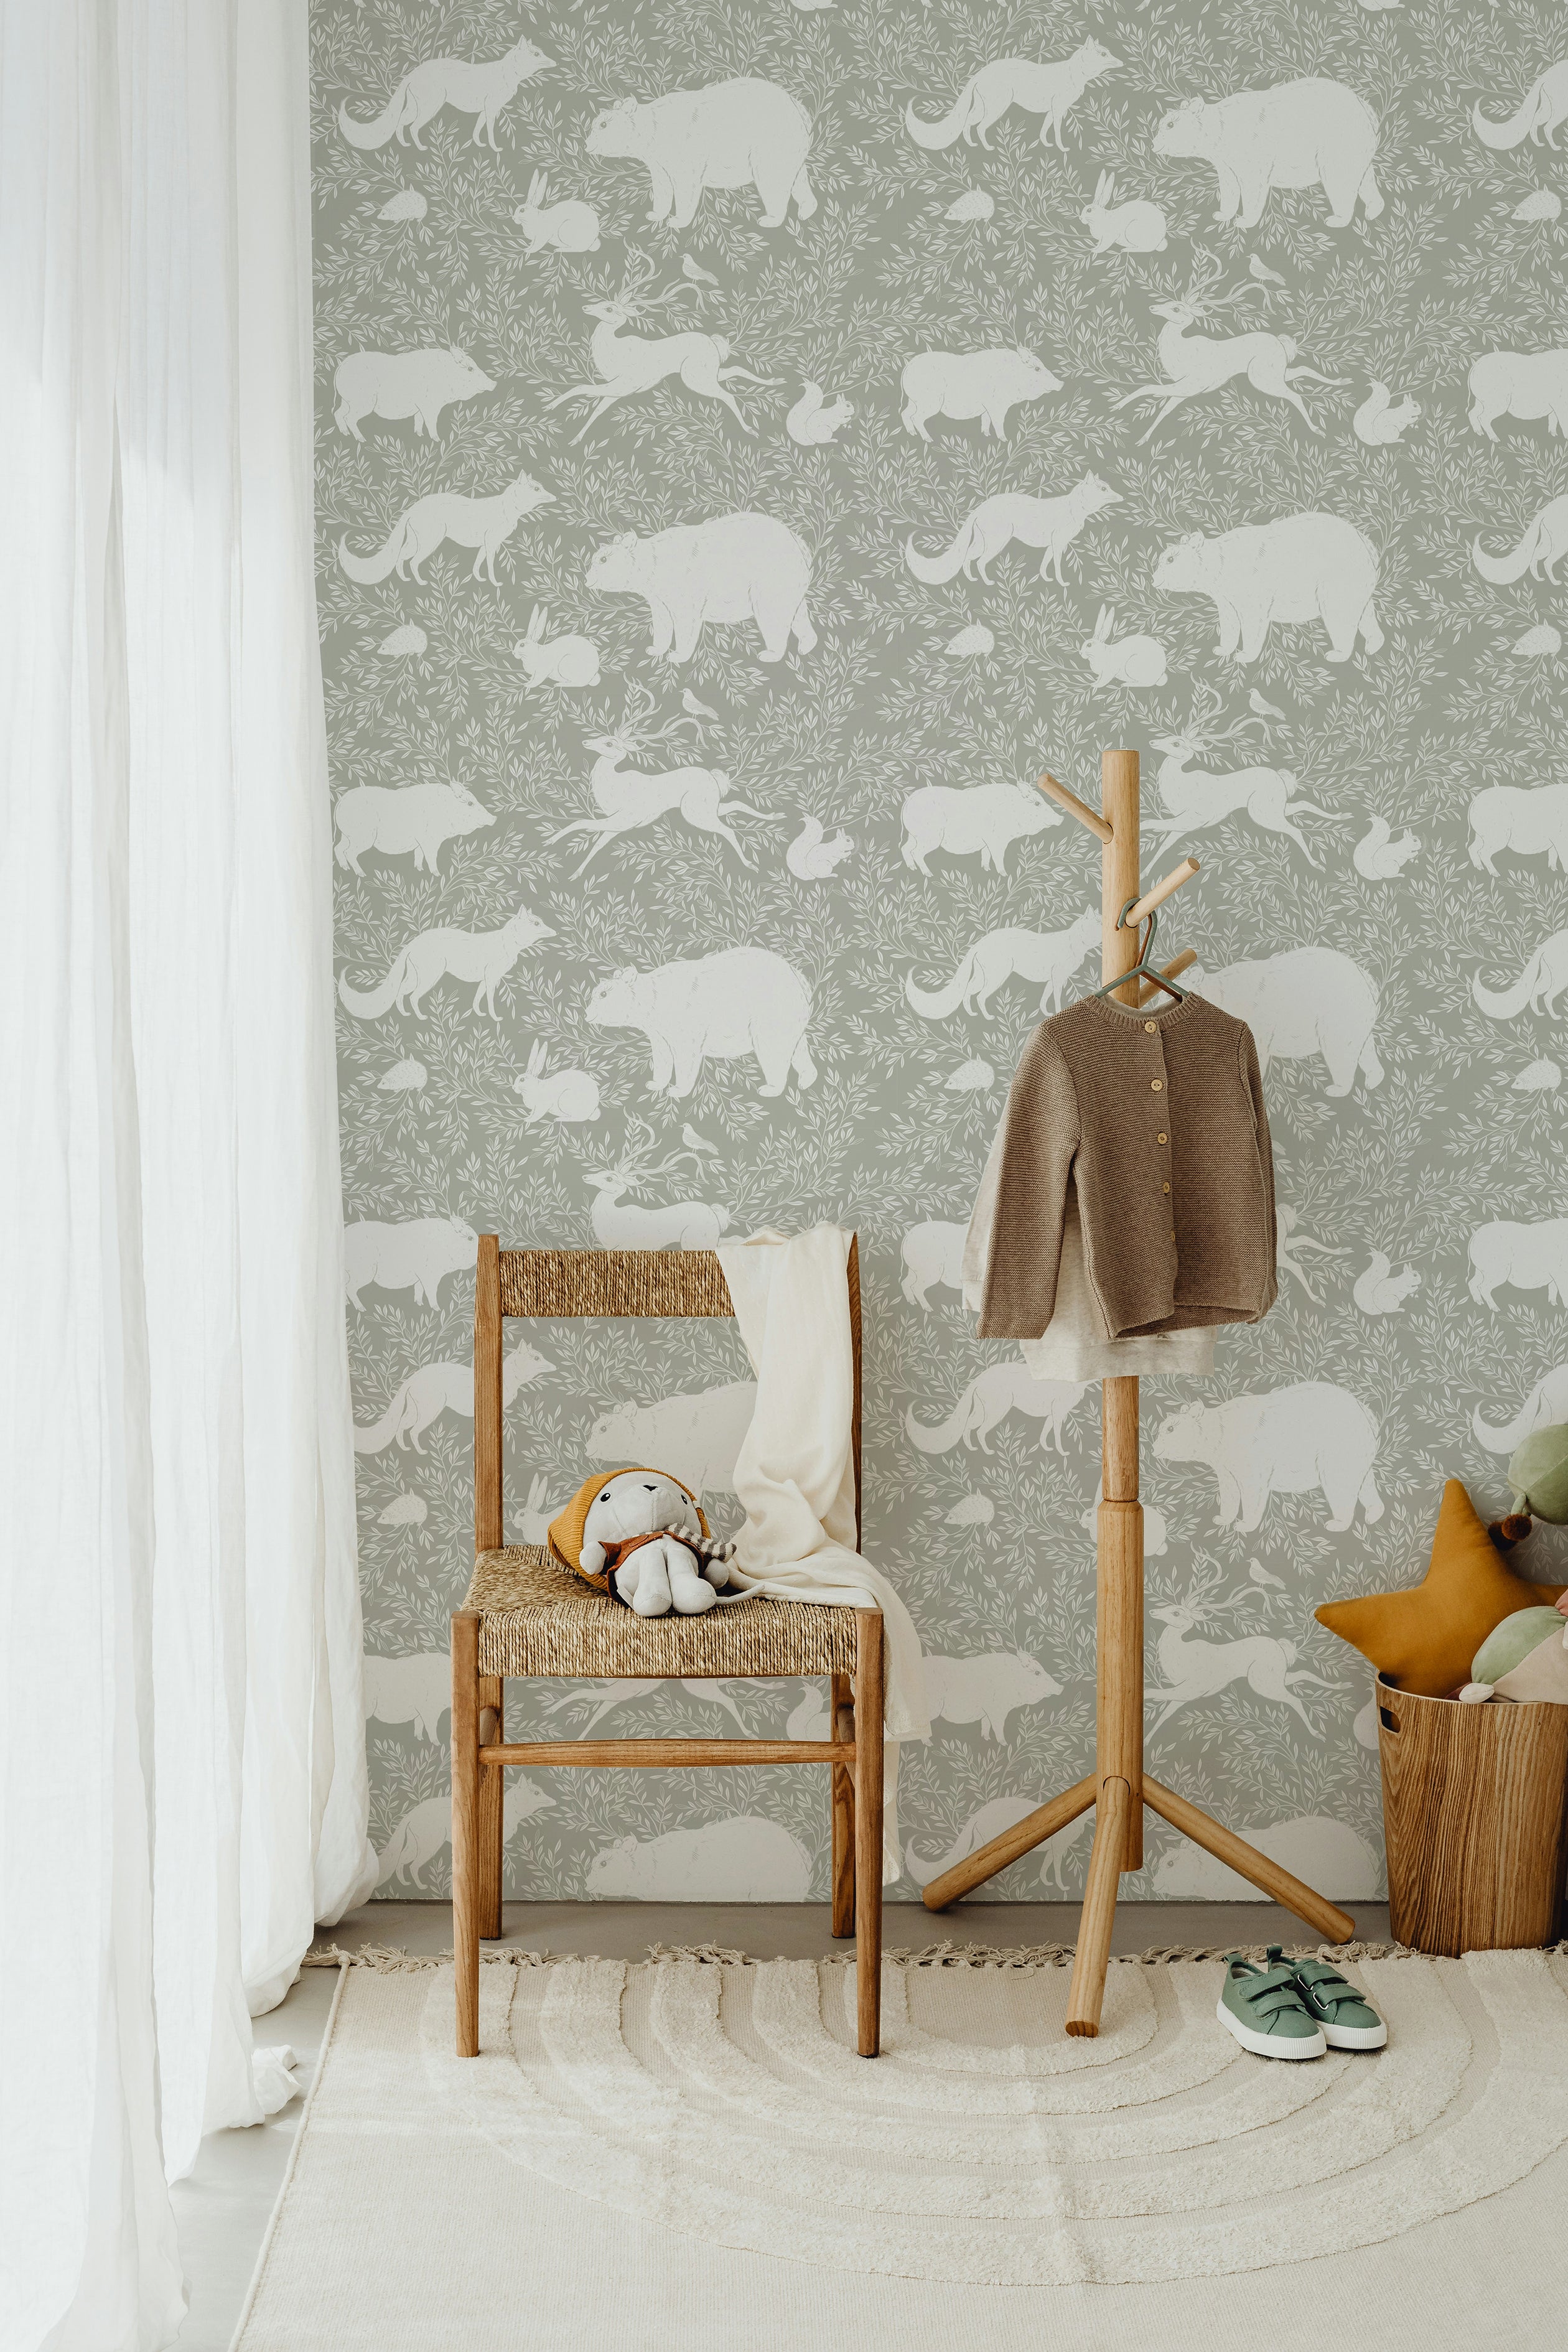 A serene corner with a wooden chair, soft toys, and a hanging coat against a green wallpaper decorated with white woodland animals such as bears, foxes, and rabbits, evoking a peaceful woodland retreat.